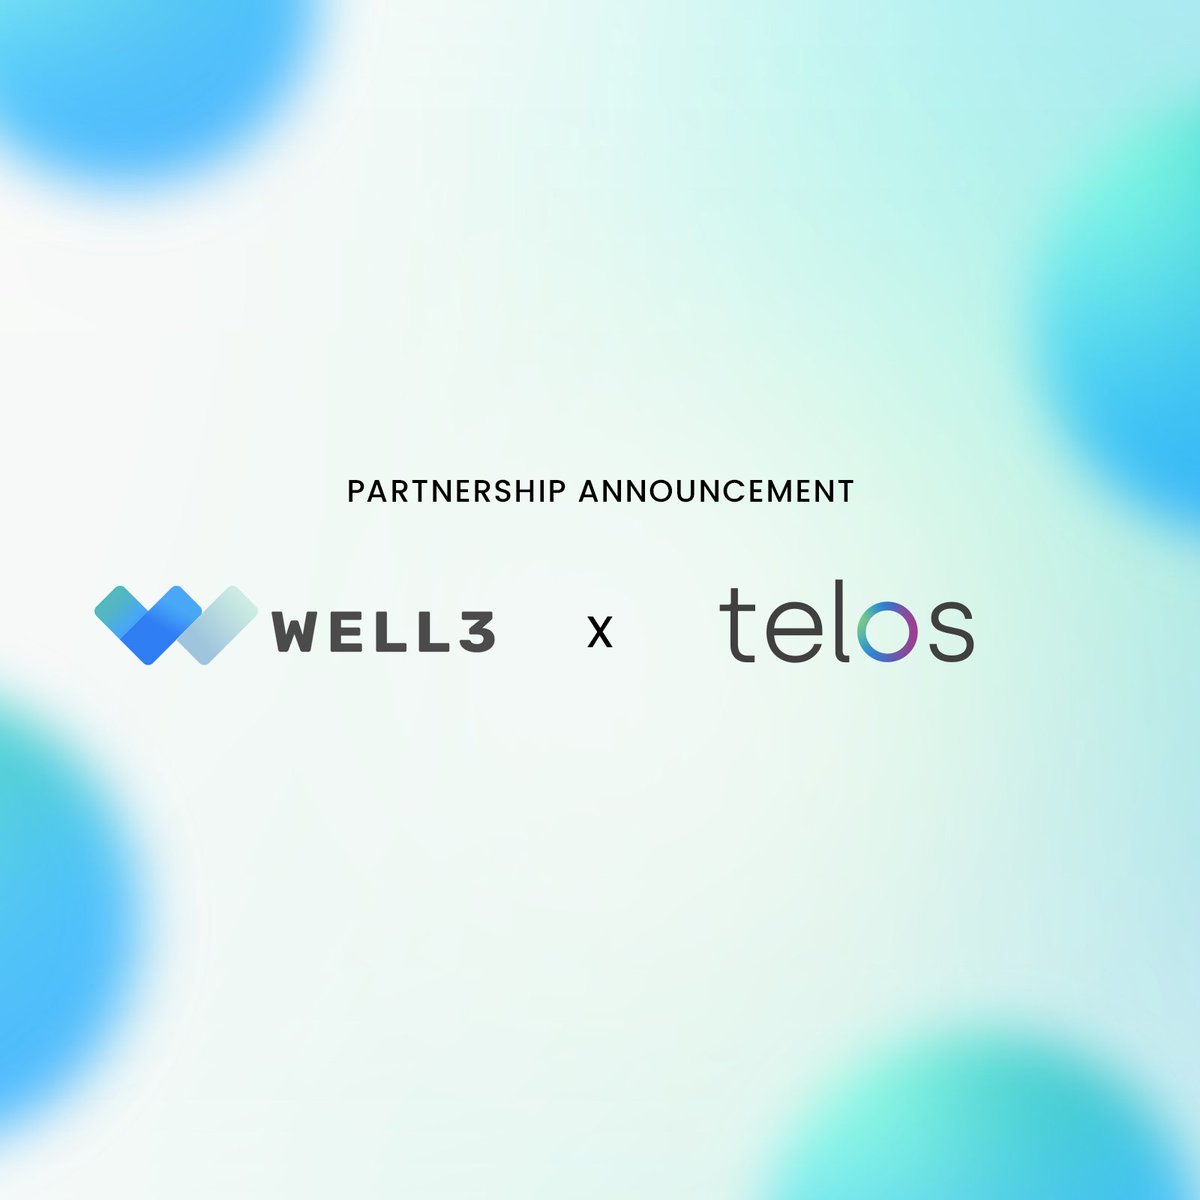 We’re excited to partner with @hellotelos, a vanguard in Layer 1 for scalability, speed and privacy. With interoperability in mind, we are committed to providing users with a seamless experience across multichain.